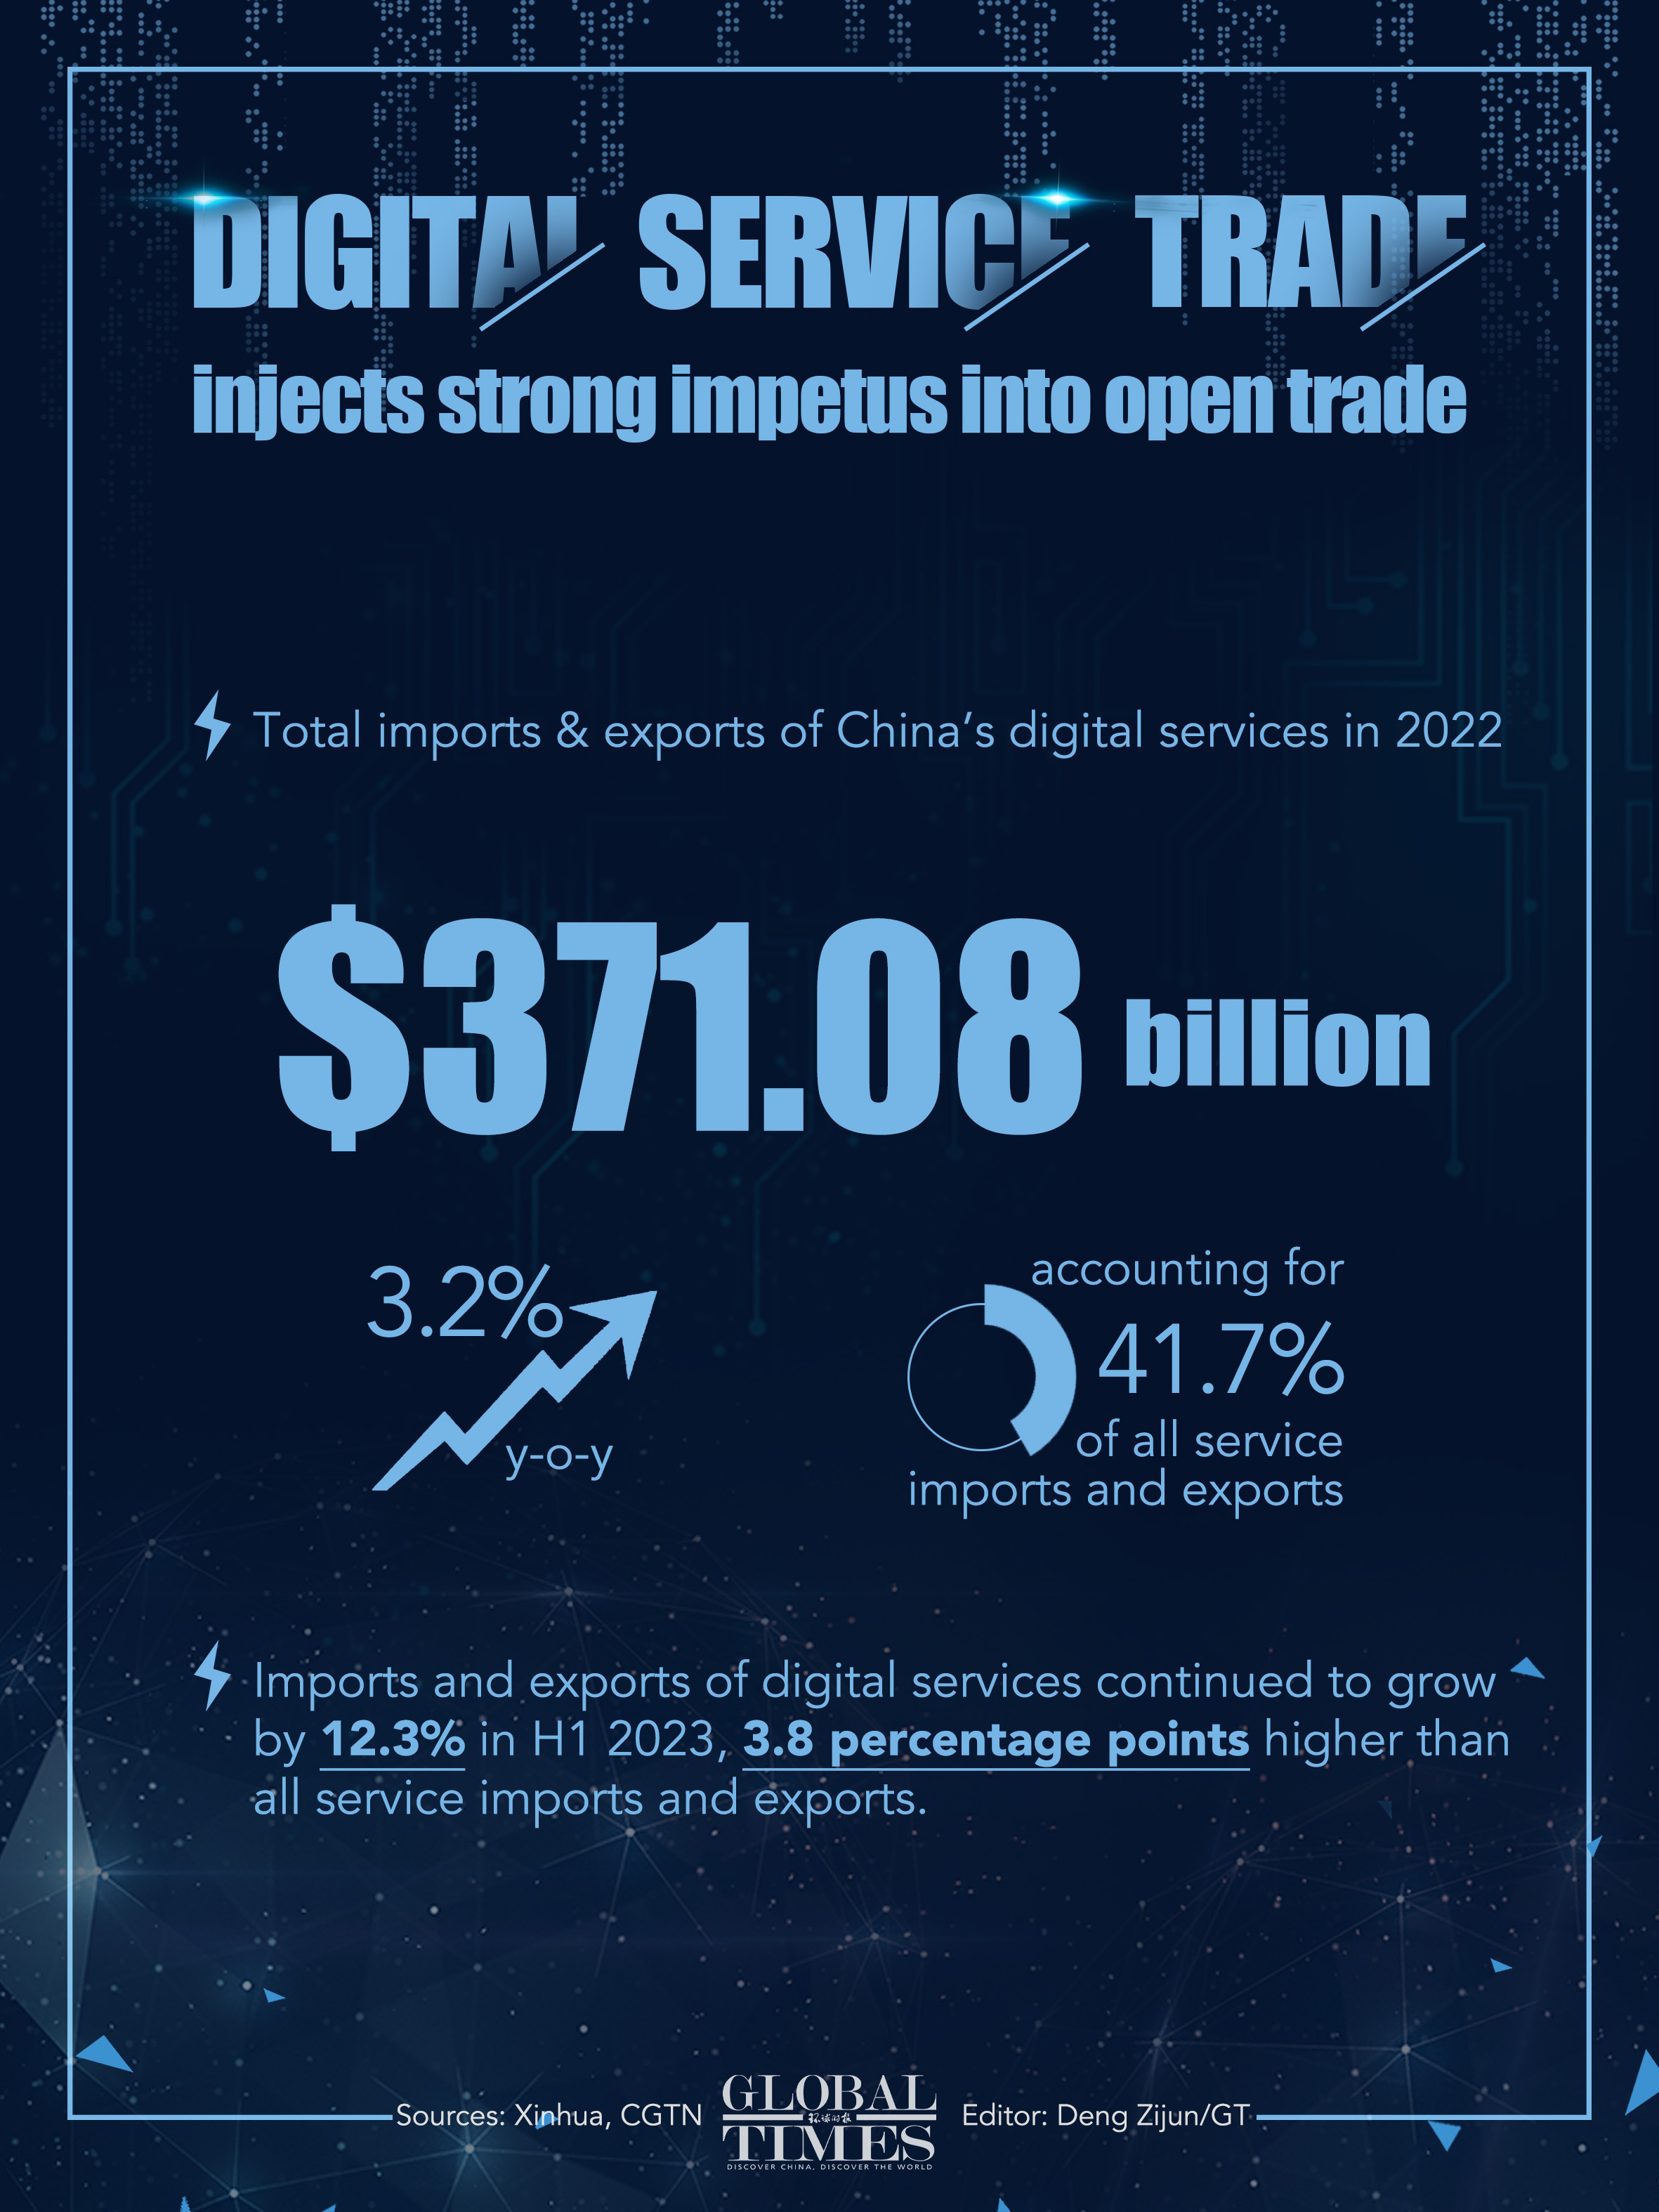 Digital service trade injects strong impetus into open trade Graphic: Deng Zijun/GT